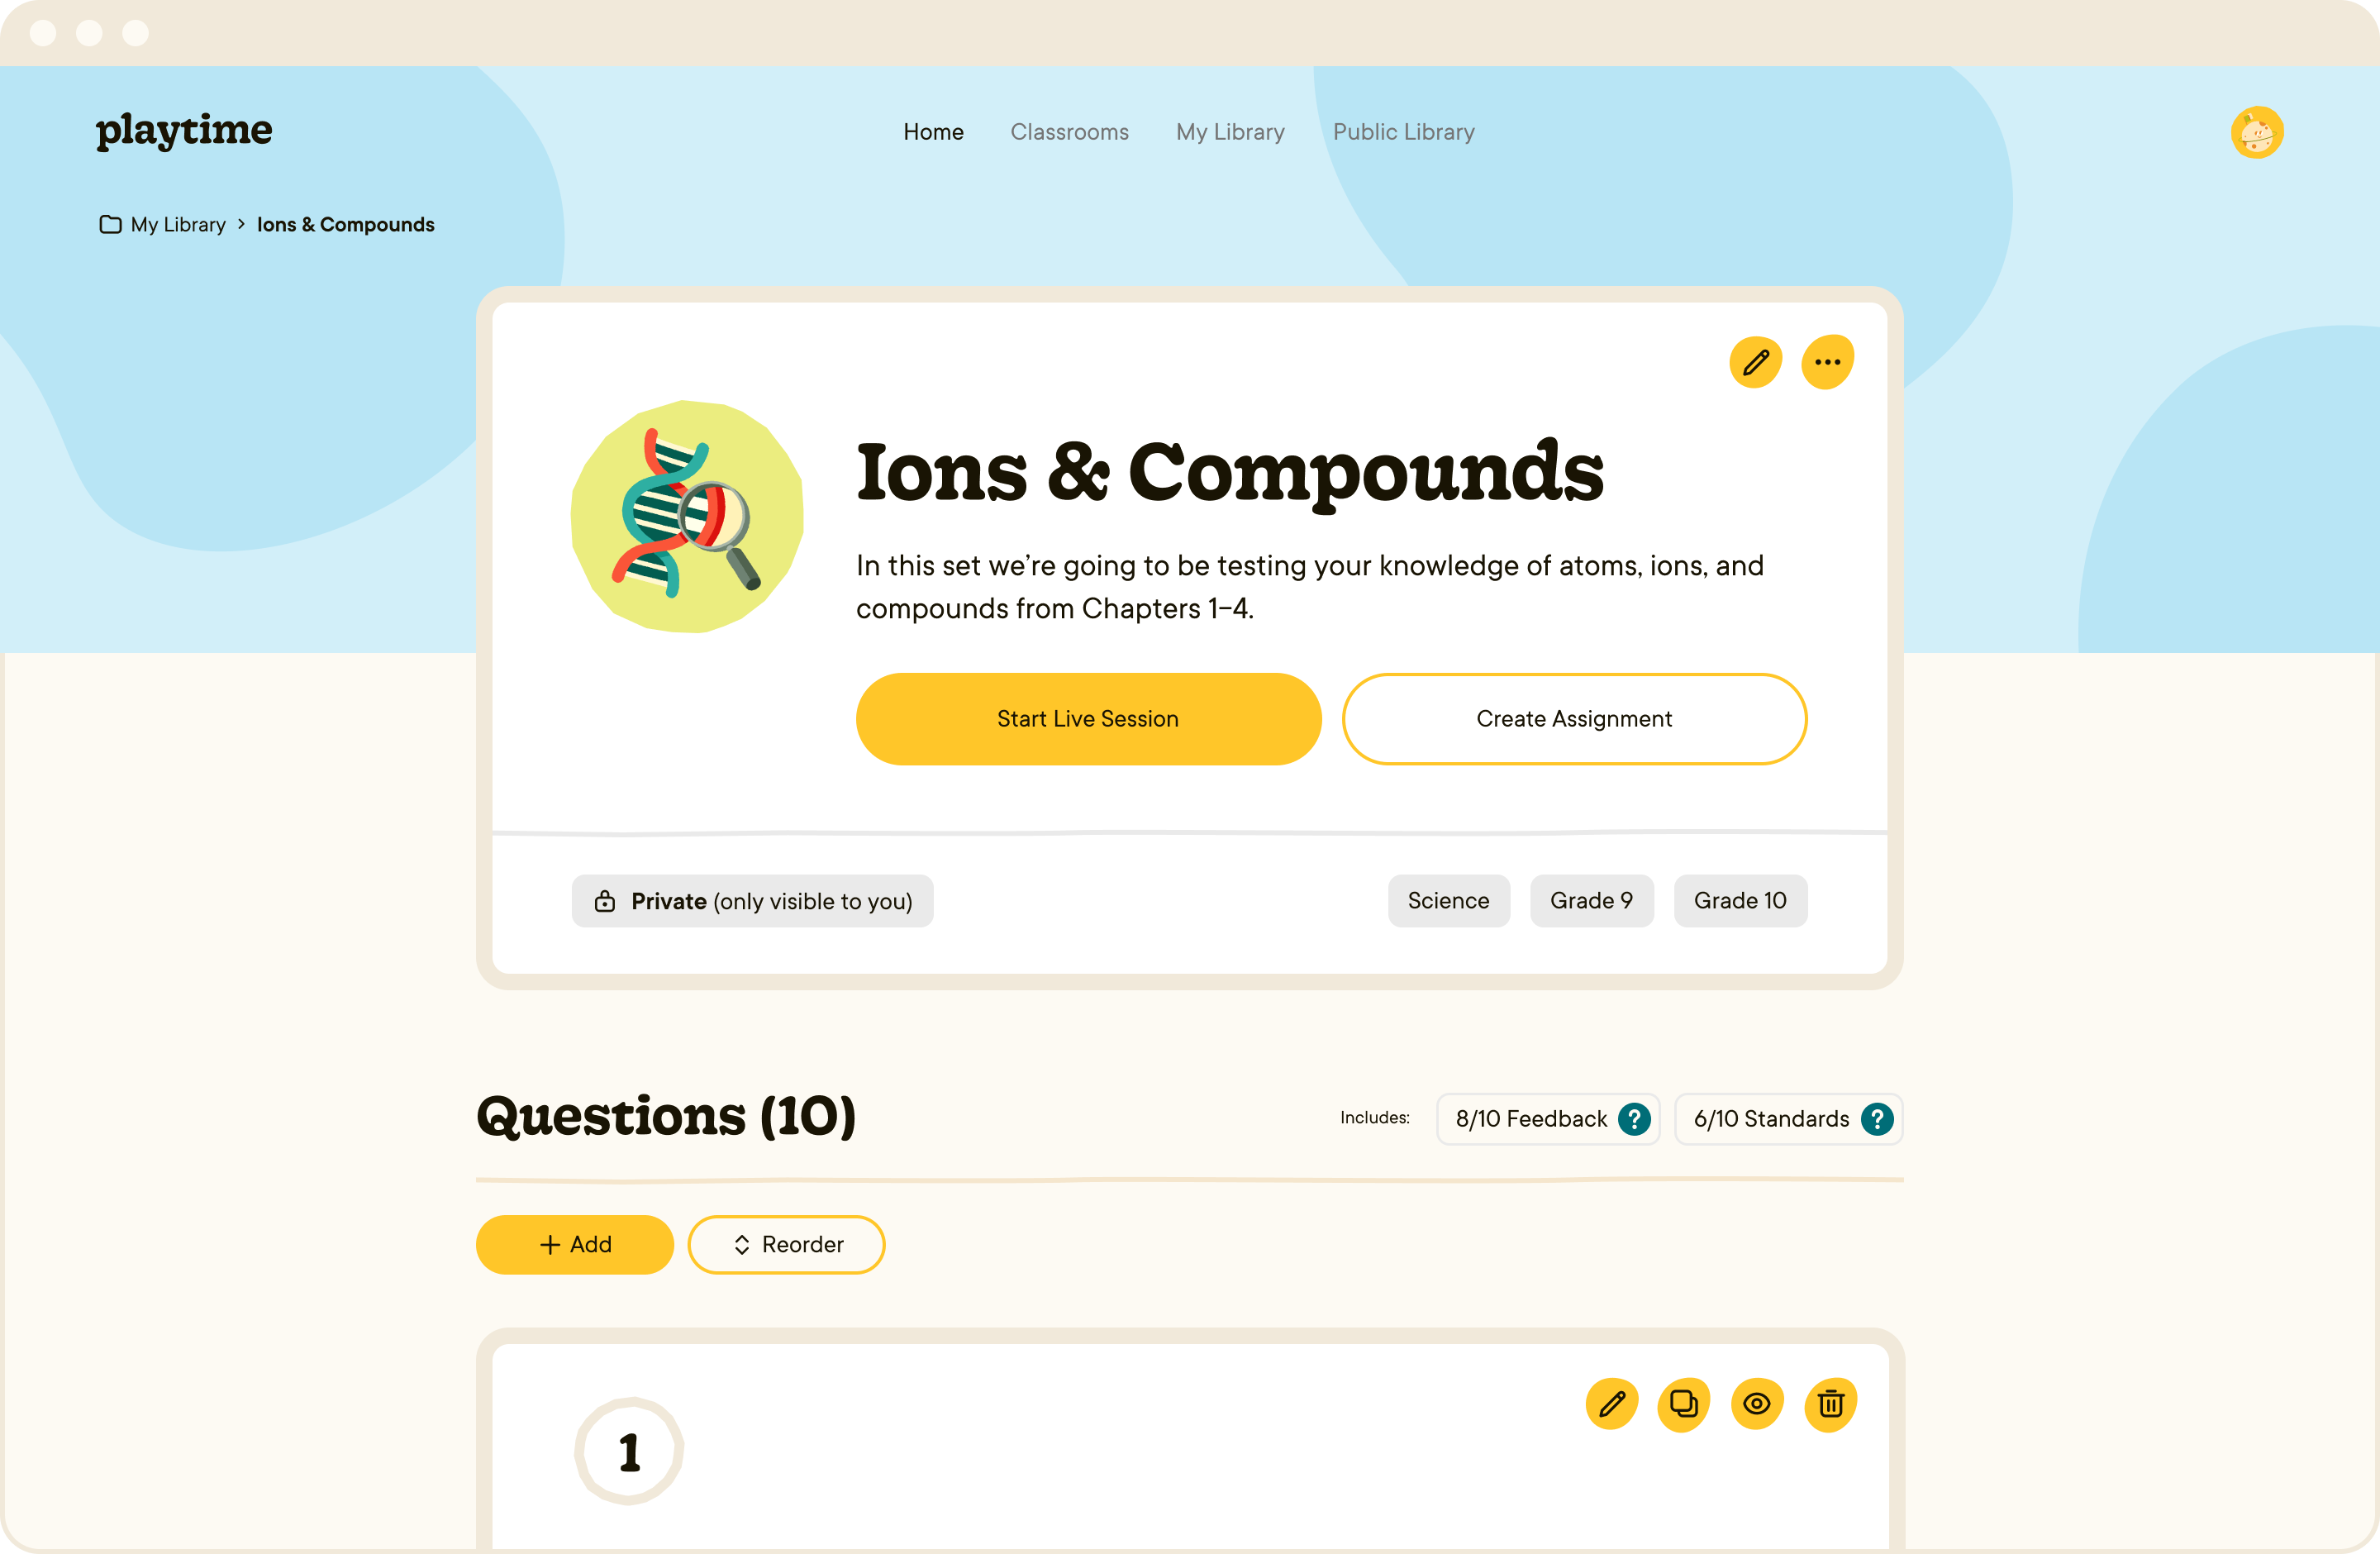 A screenshot of an assignment page, from the teacher's point of view. There is a hero element with the title 'Ions & Compounds'. Below is the beginning of the questions list, but the page cuts off before you can read the first question.